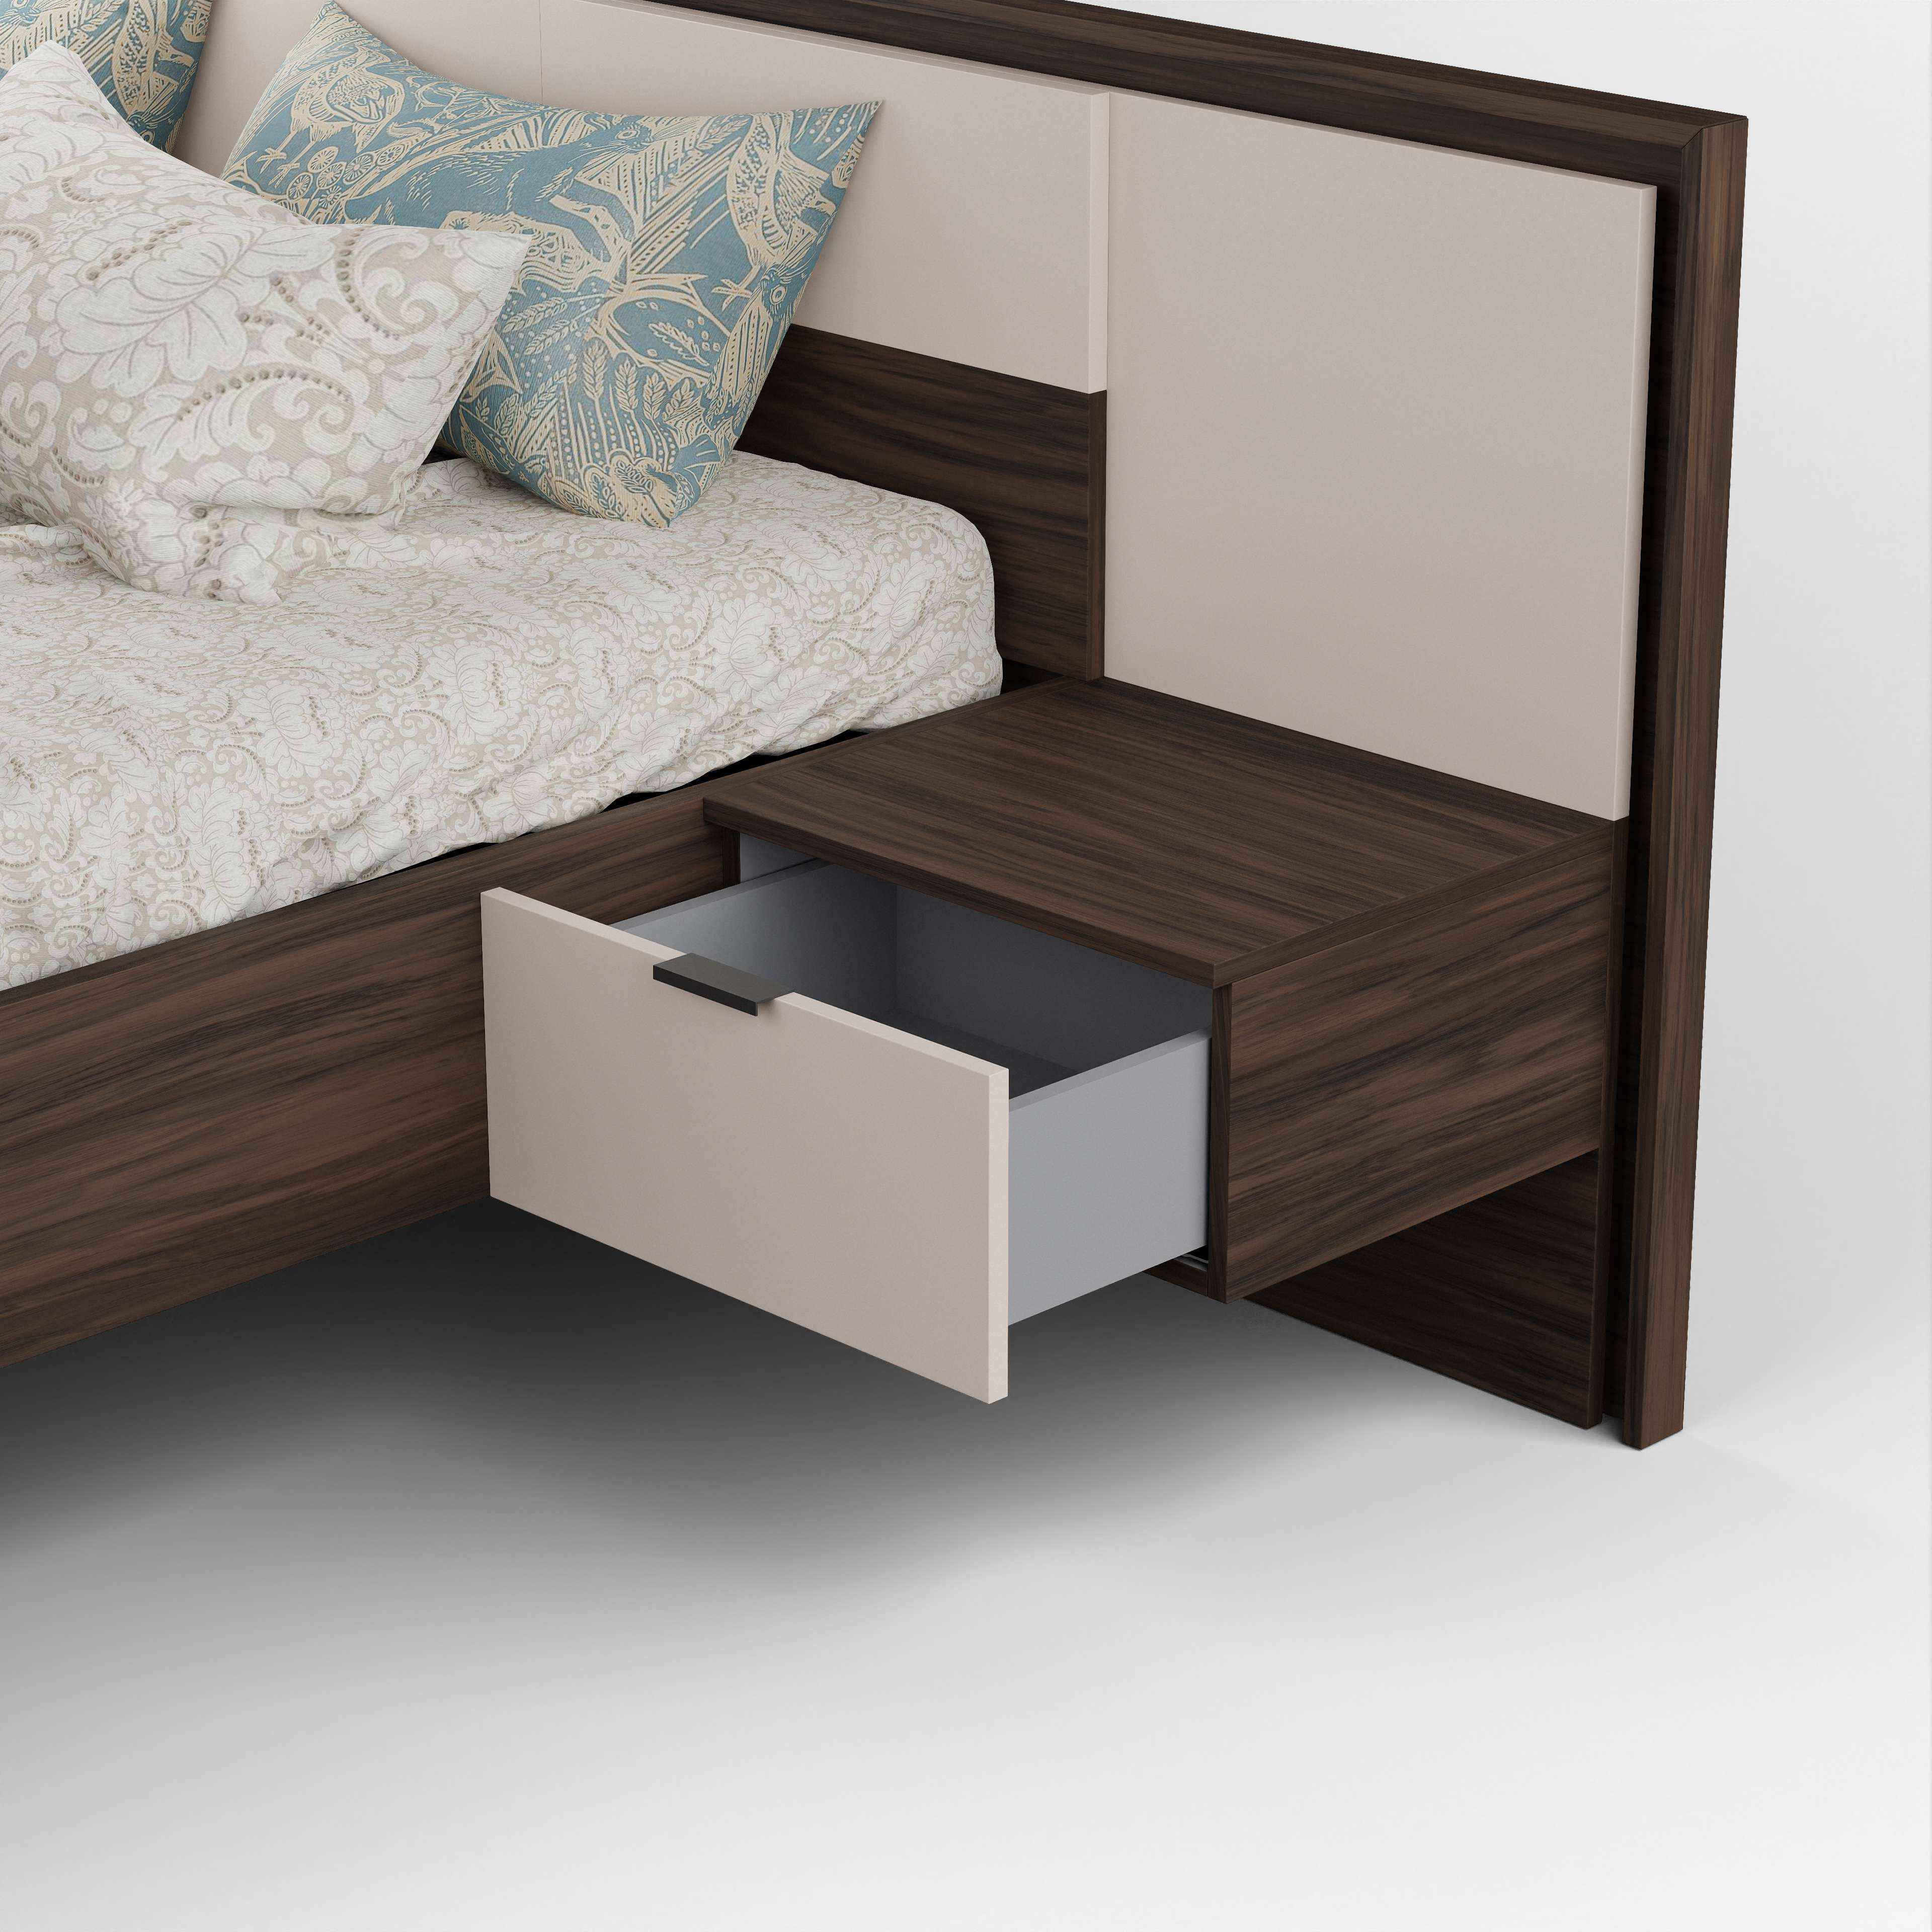 Miho Vernon King Size Bed